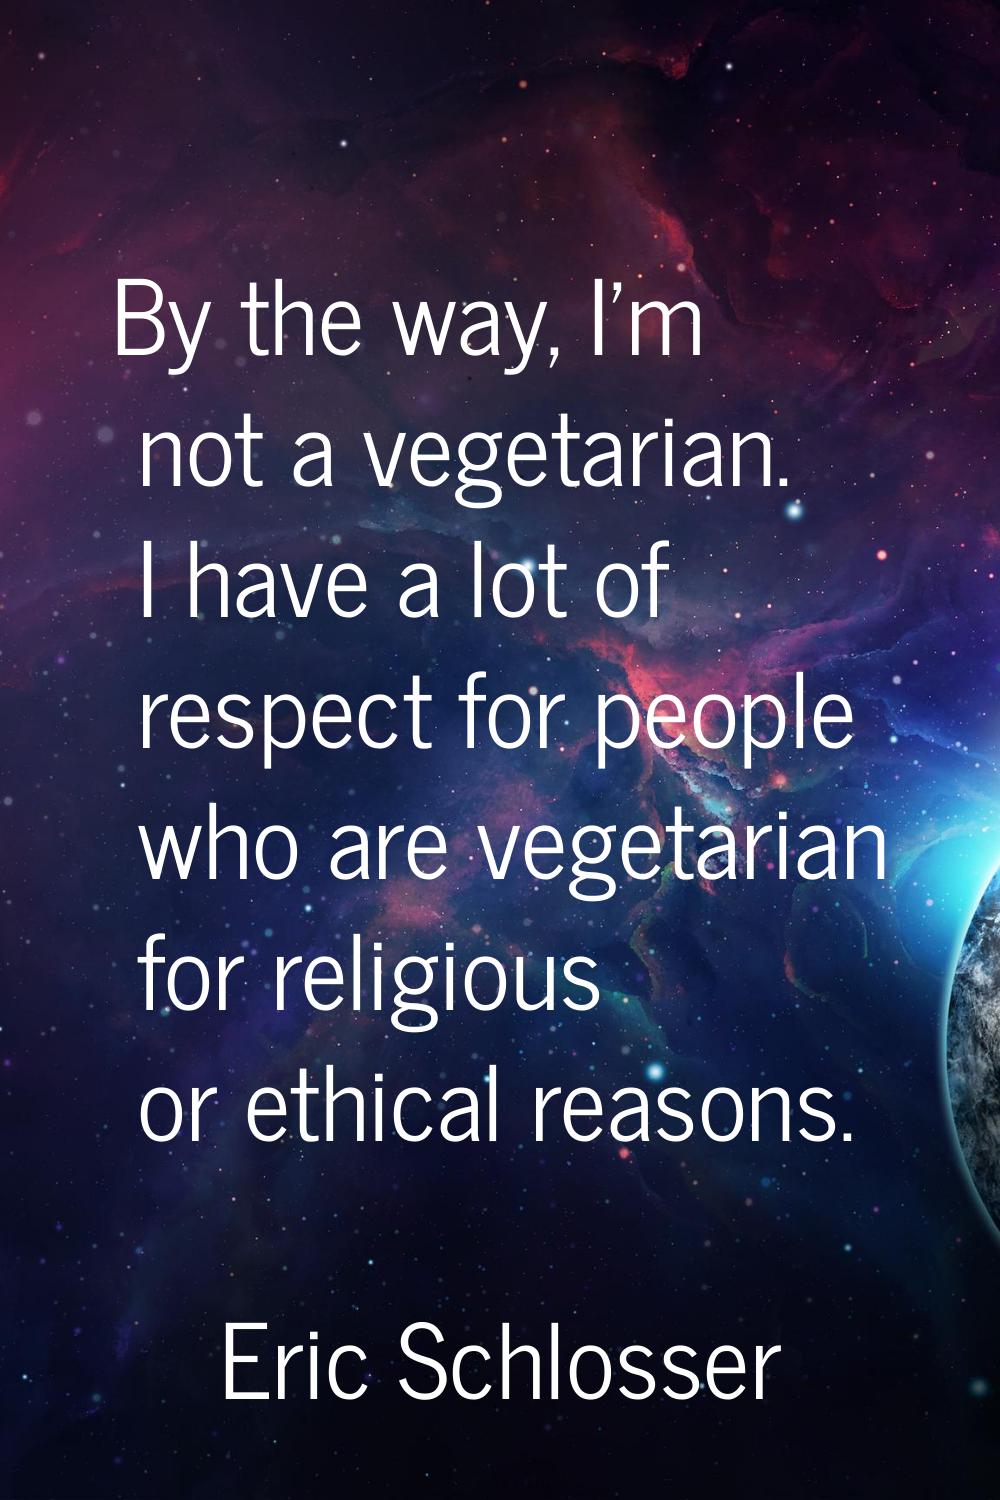 By the way, I'm not a vegetarian. I have a lot of respect for people who are vegetarian for religio